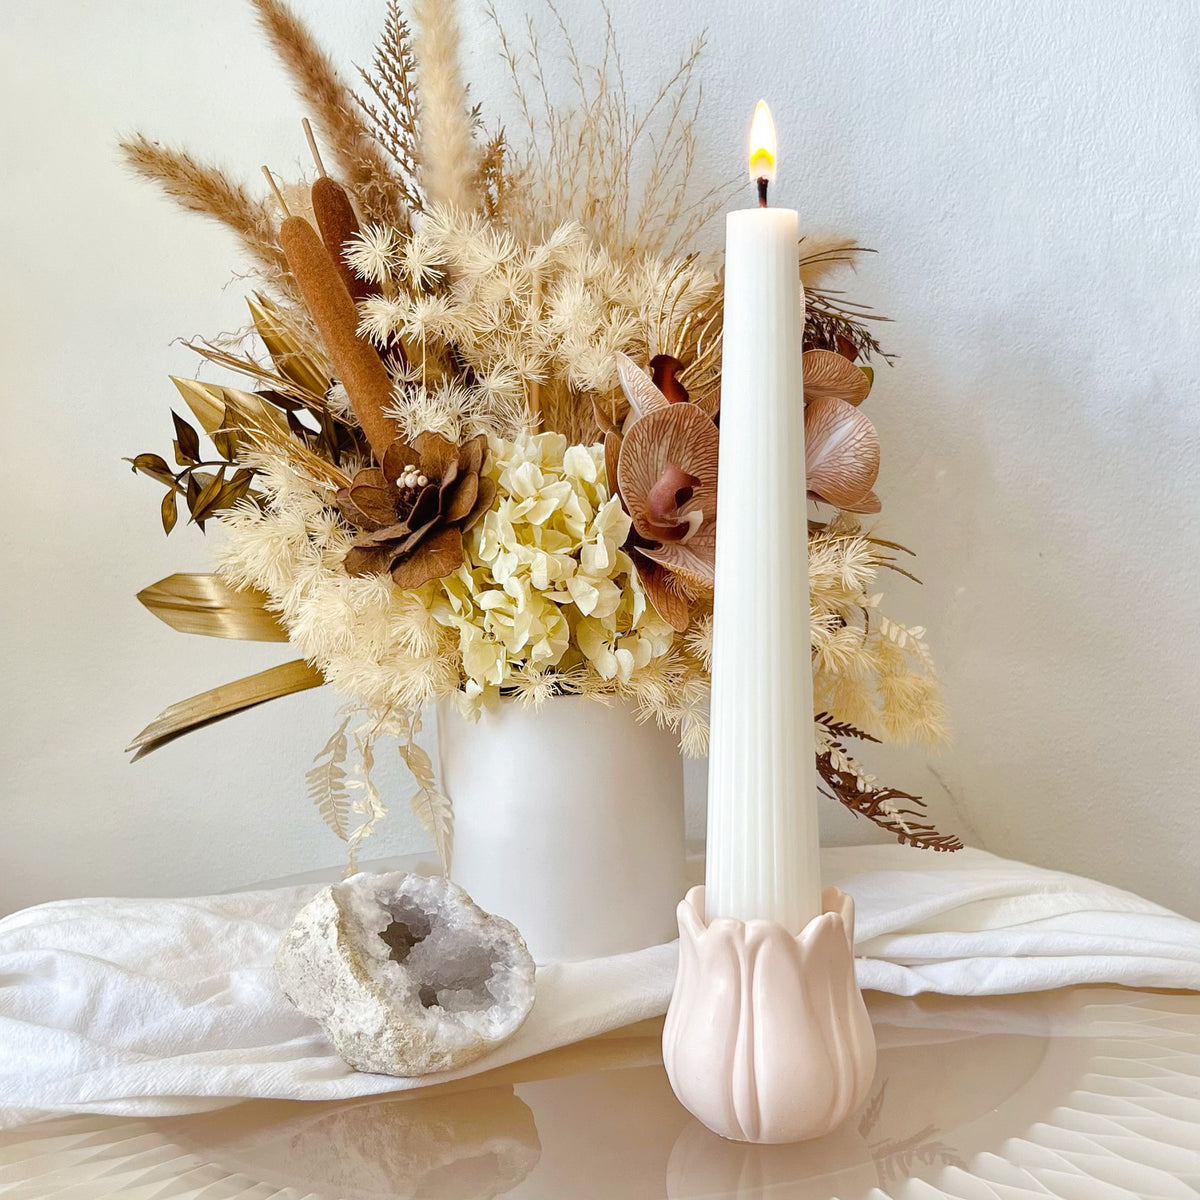 Handcrafted Tulip Flower Candle Holder | LMJ Candles